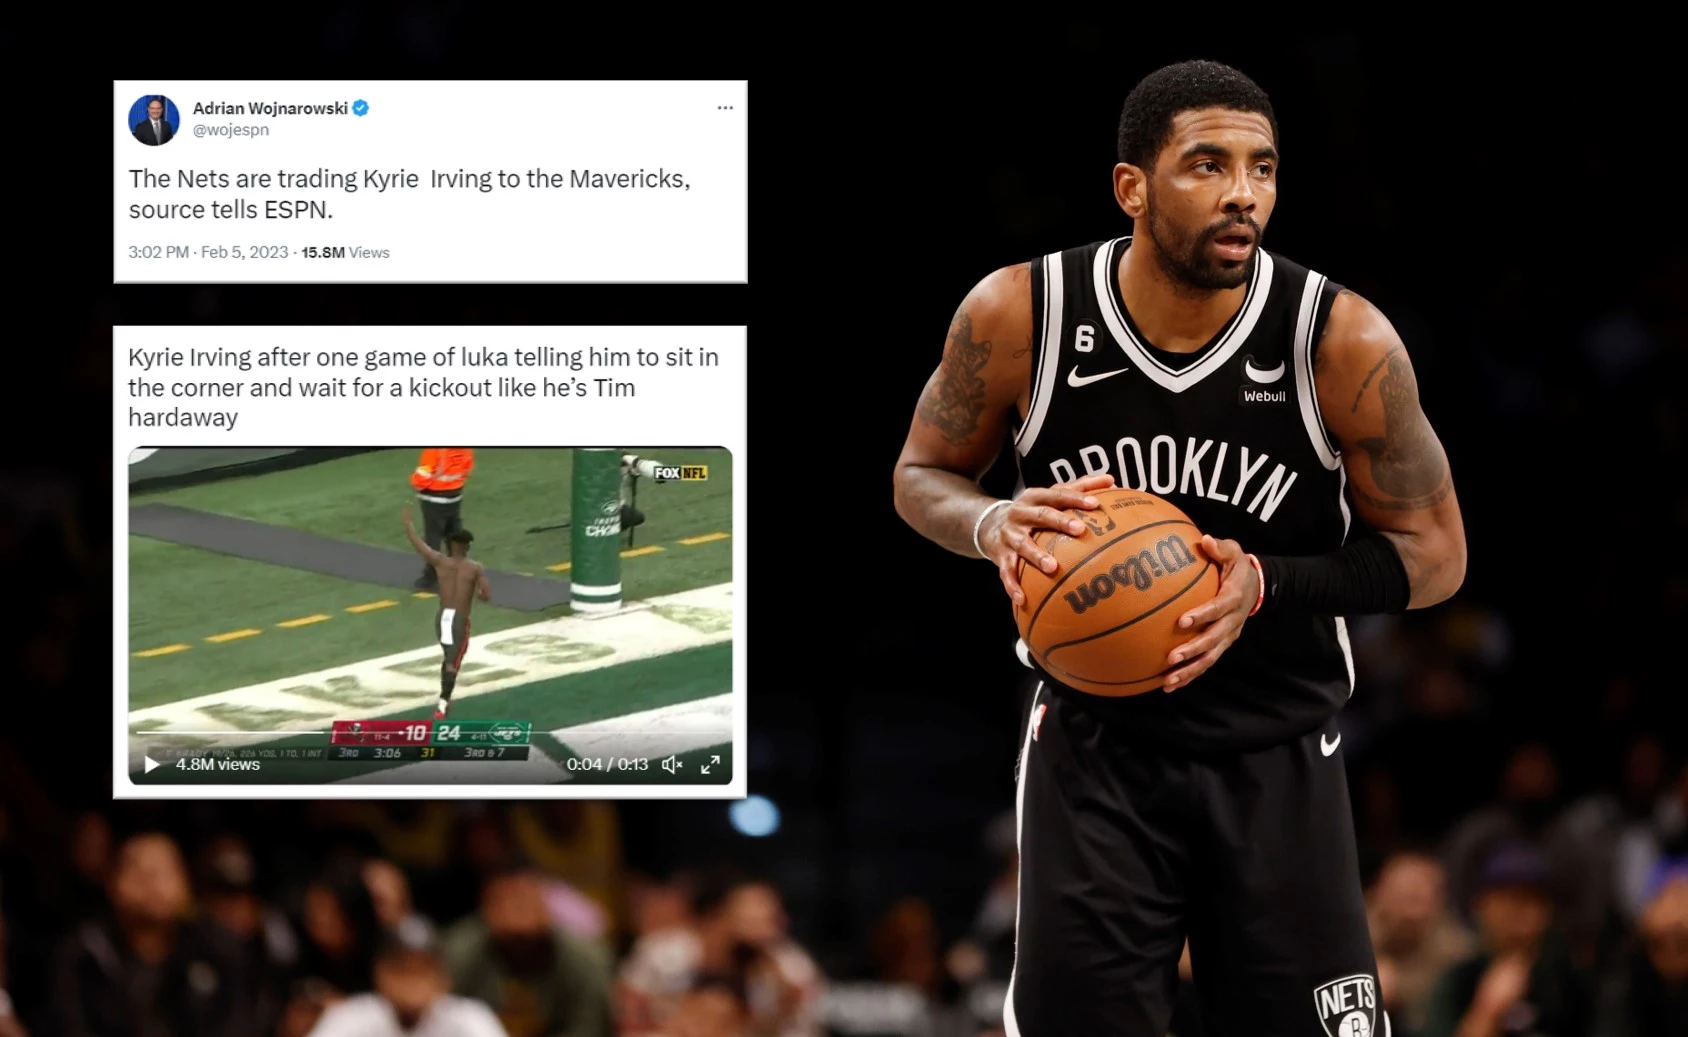 New York Fans Roast Kyrie Irving in Hilarious Tweets After Trade